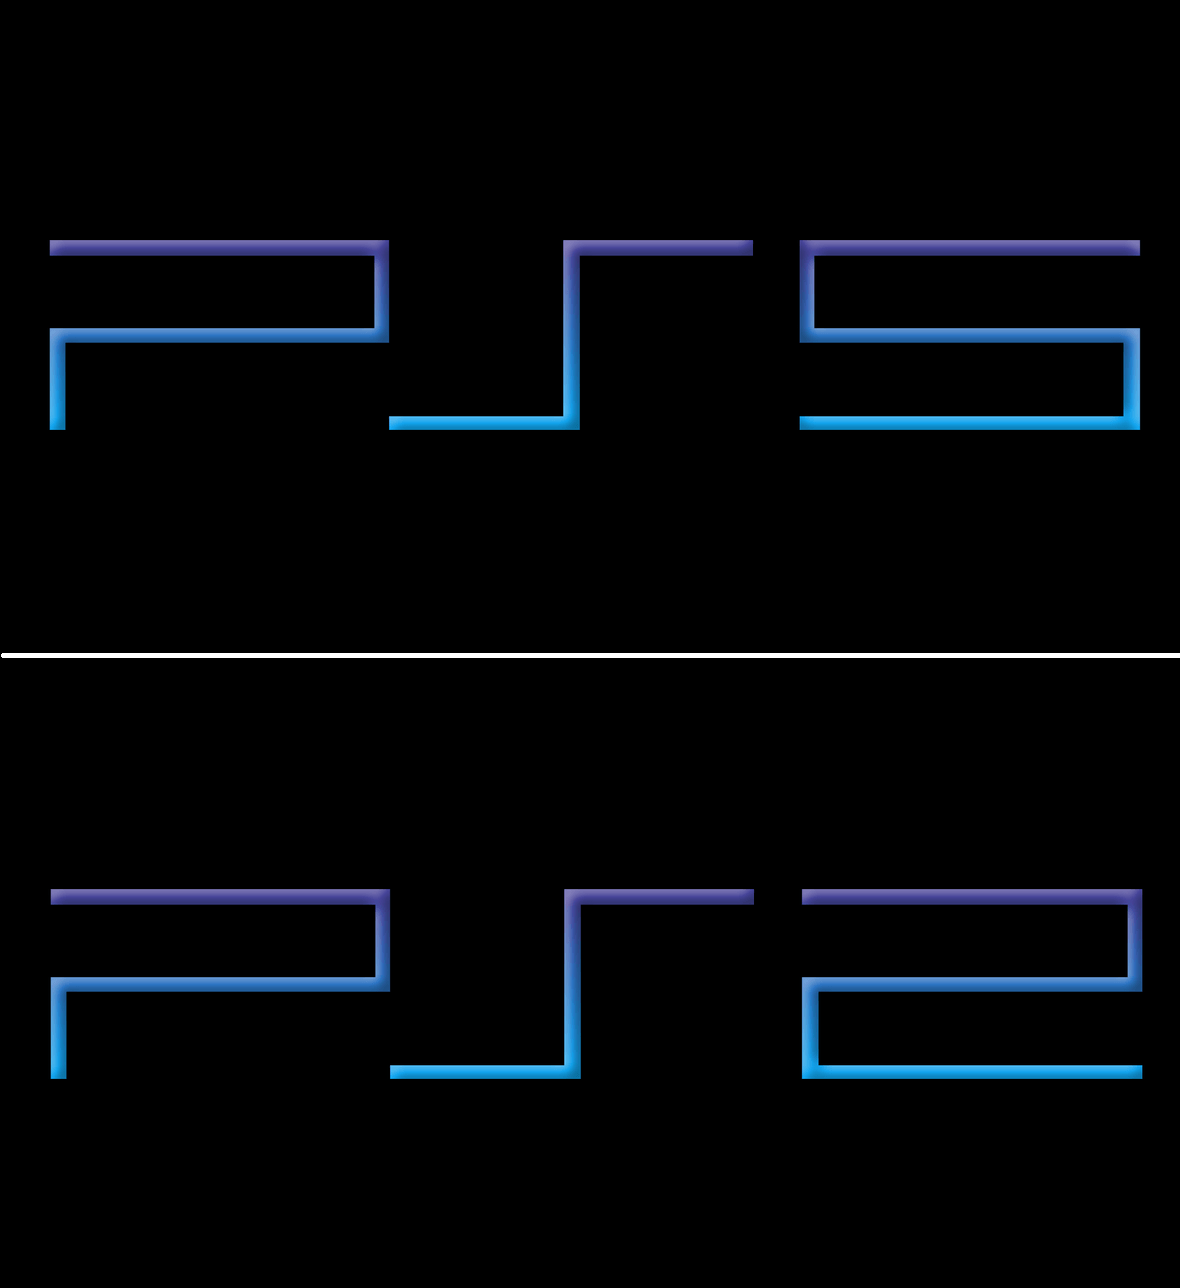 PS5 Logo - Somewhere someone is slaving over the PS5 logo and how to